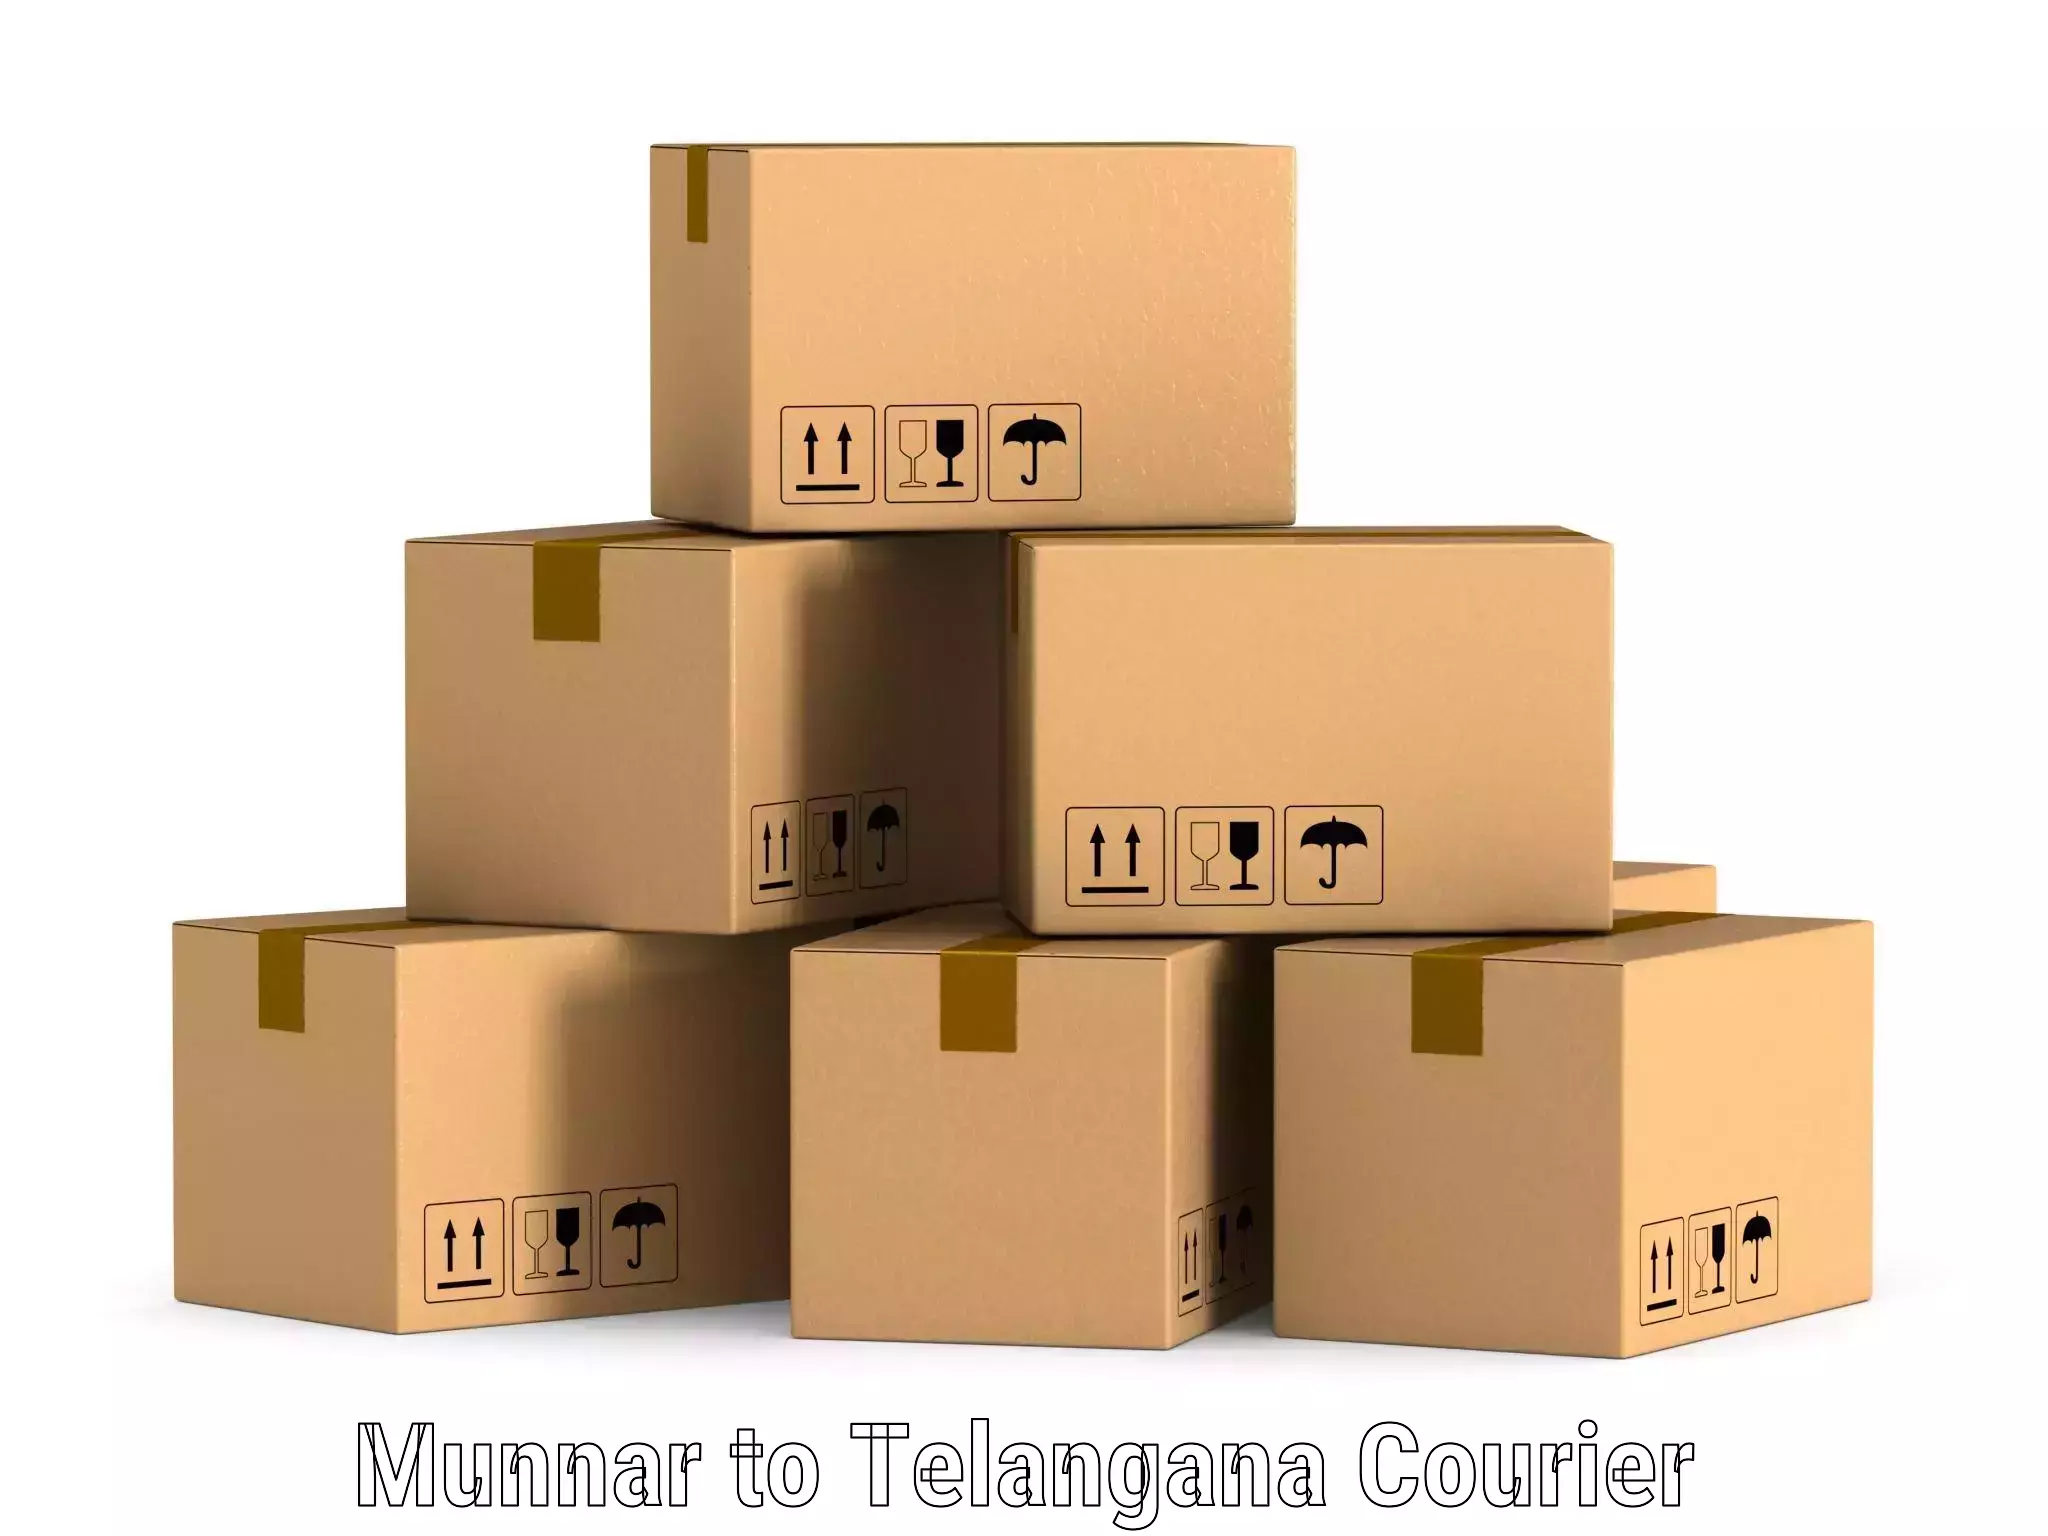 Local courier options Munnar to Kalwakurthy